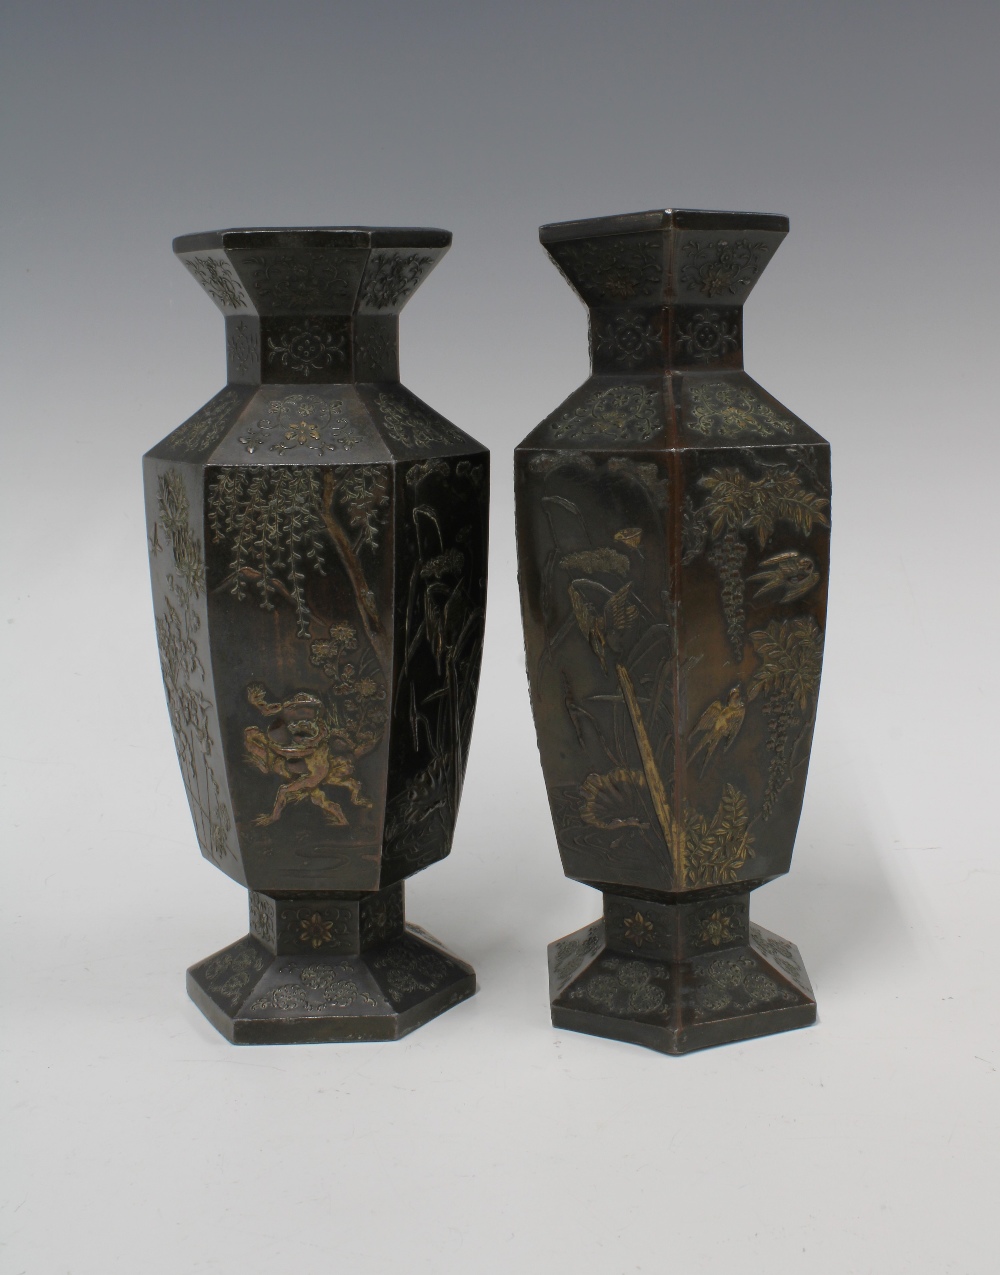 A pair of Japanese bronze patinated metal vases, hexagonal form with relief pattern of storks and - Image 2 of 3